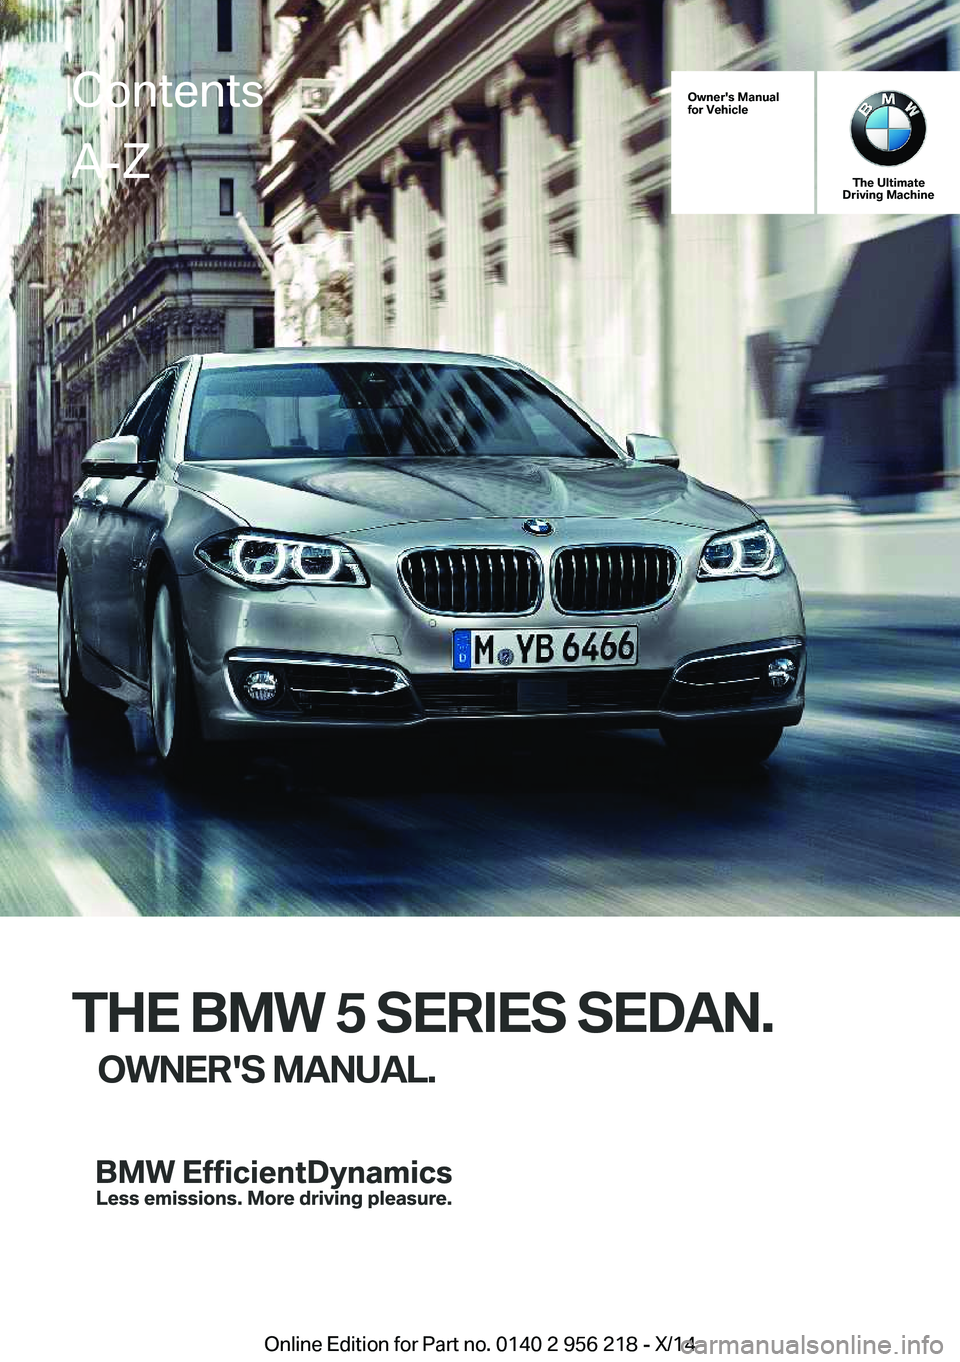 BMW 535I XDRIVE SEDAN 2014  Owners Manual Owner's Manual
for Vehicle
The Ultimate
Driving Machine
THE BMW 5 SERIES SEDAN.
OWNER'S MANUAL.
ContentsA-Z
Online Edition for Part no. 0140 2 956 218 - X/14   